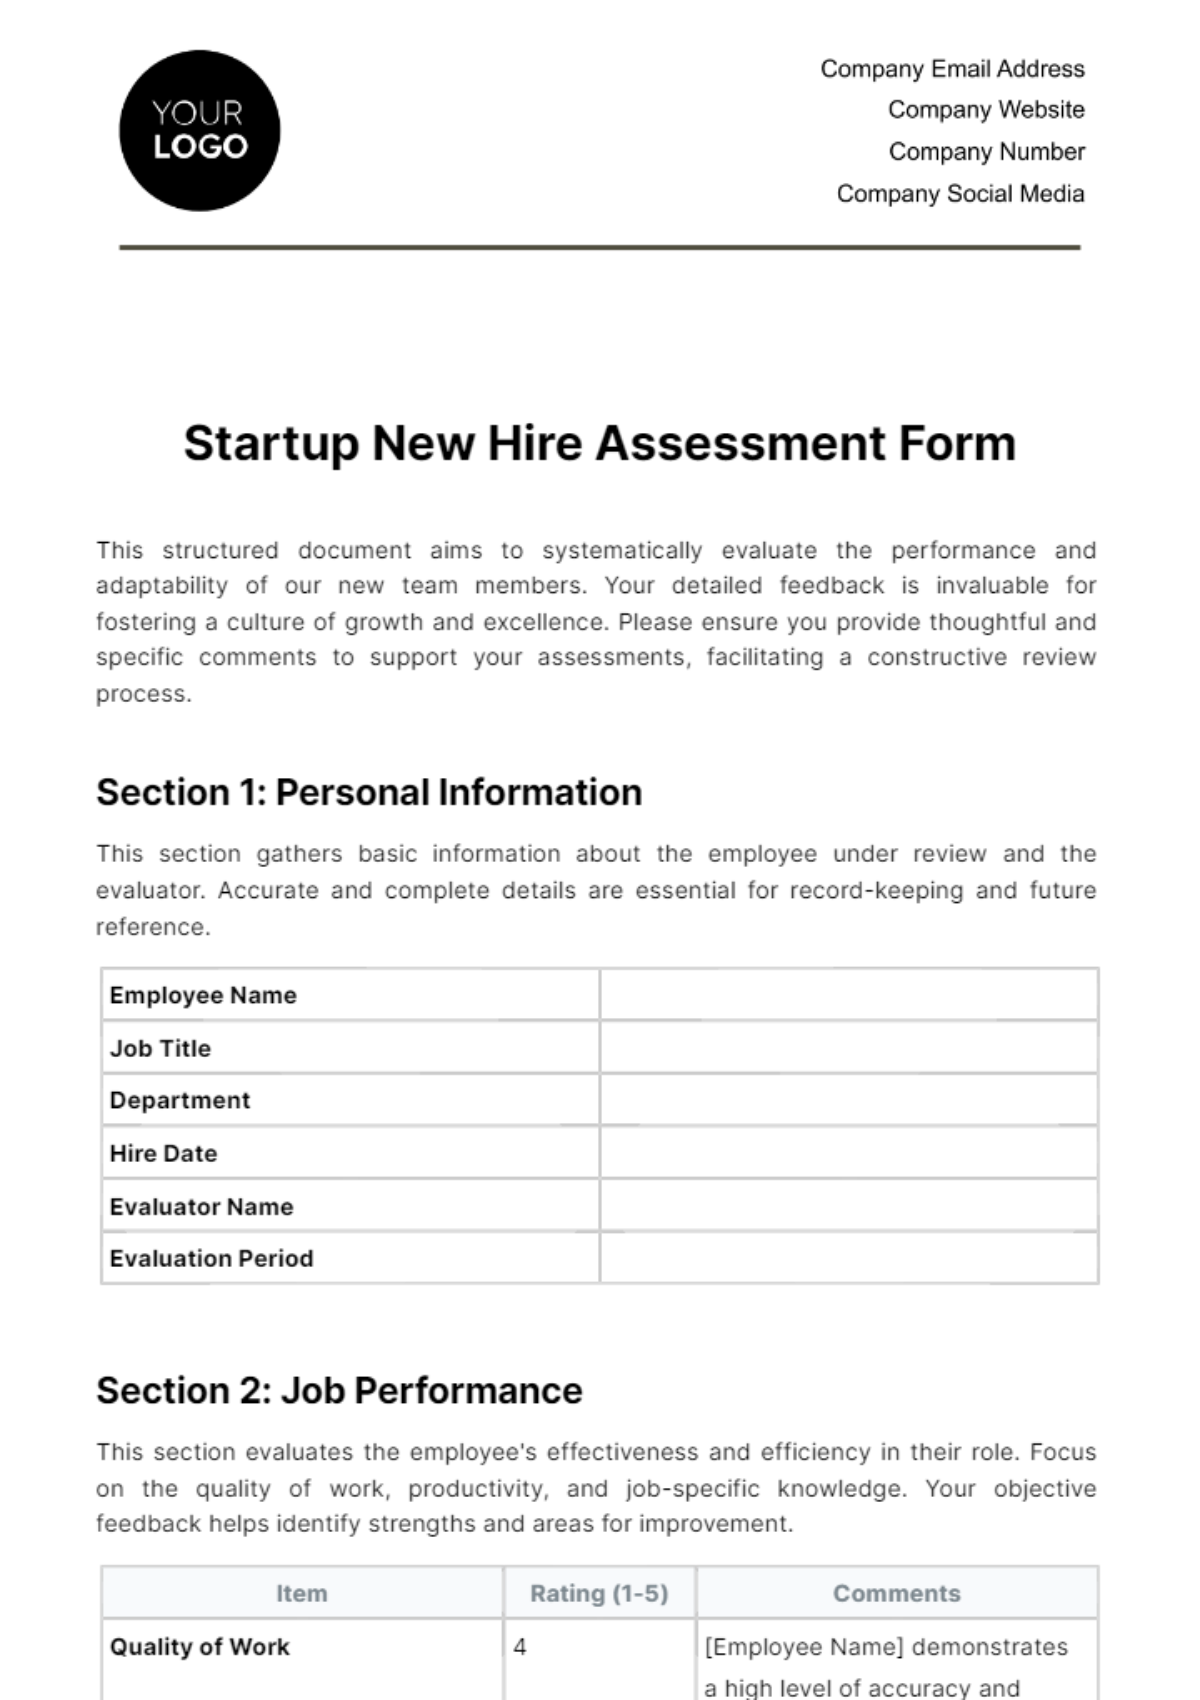 Free Startup New Hire Assessment Form Template